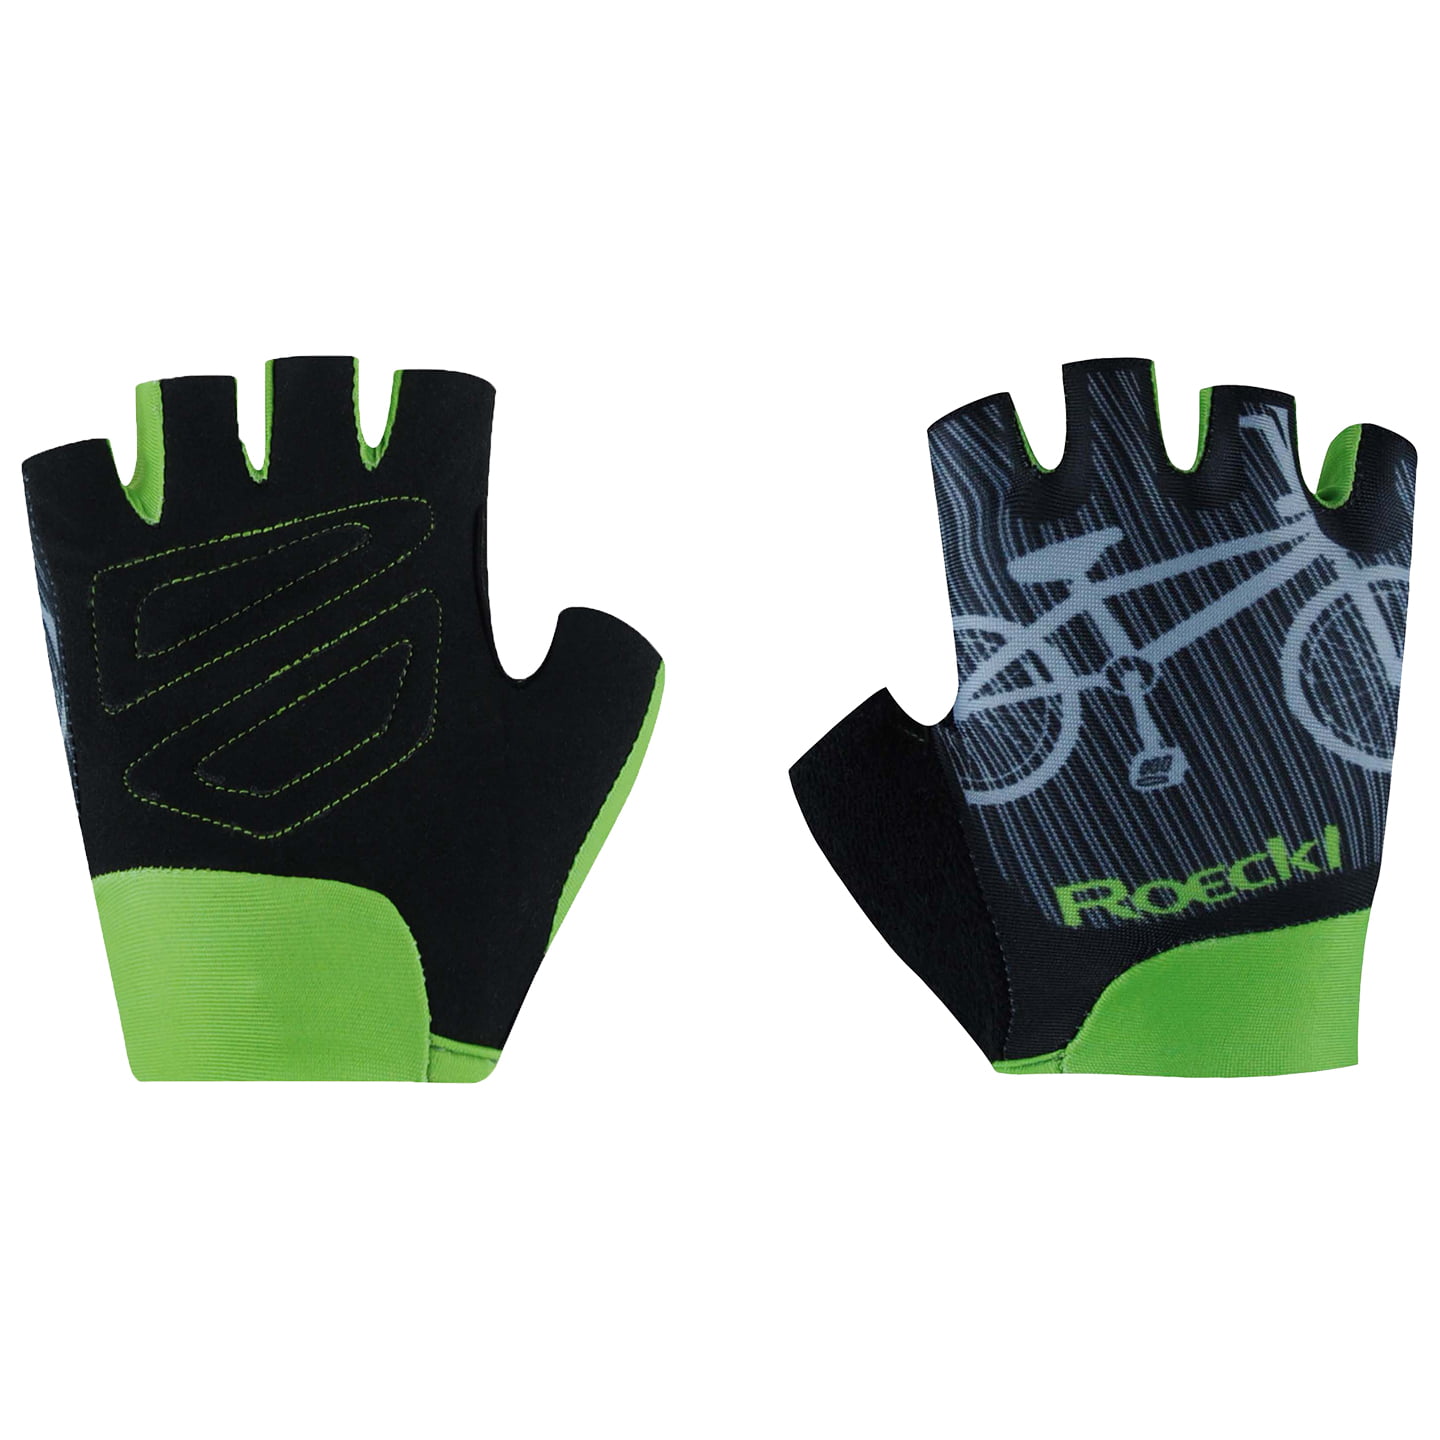 ROECKL Trapani Kids Gloves Kids Cycling Gloves, size 6, Kids cycle gloves, Kids cycling gear